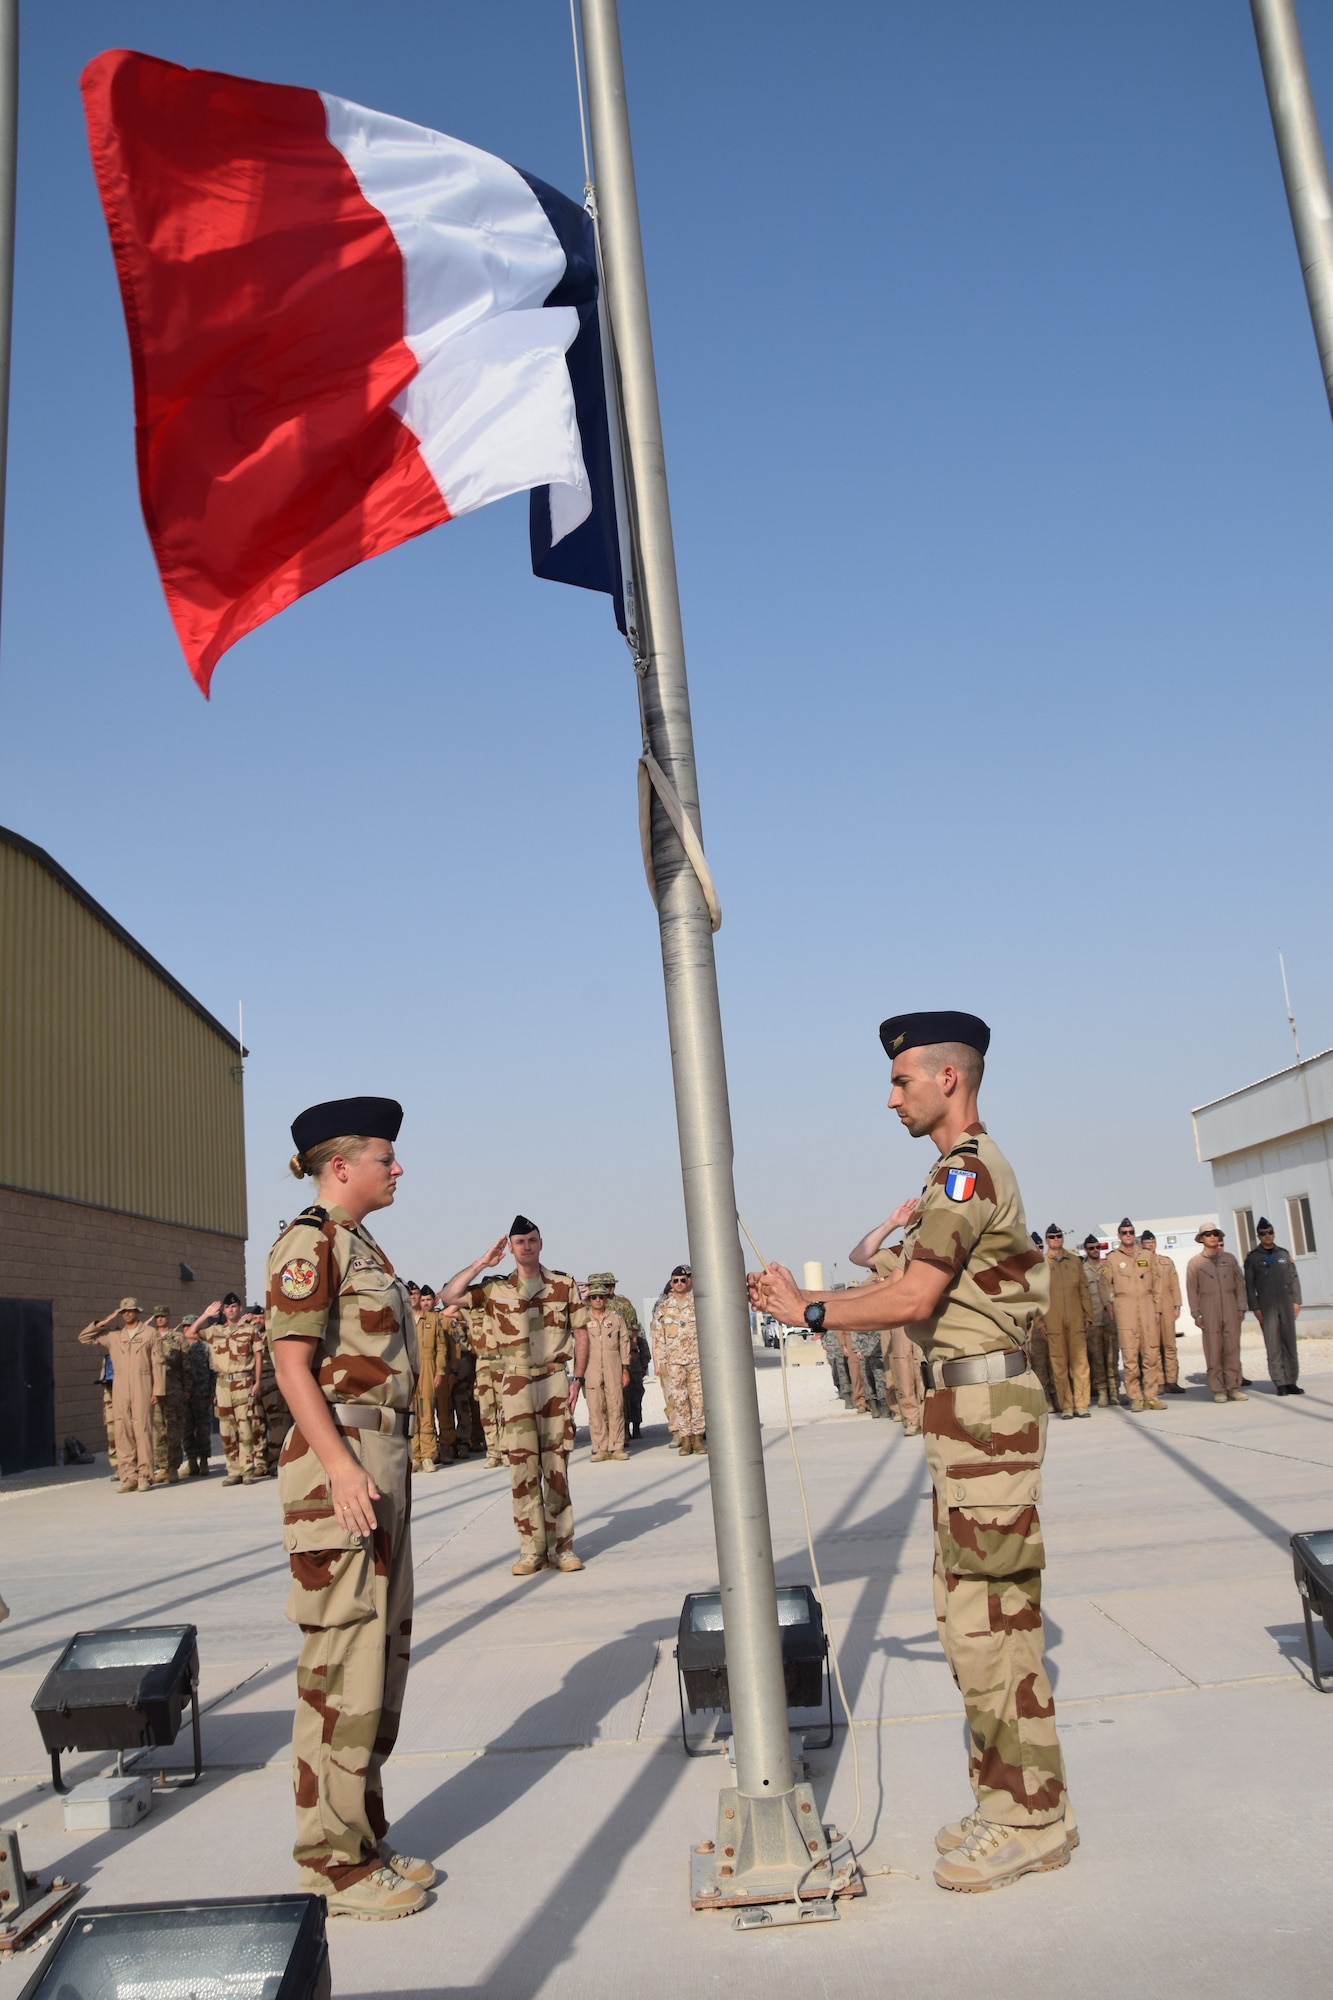 Members of the “garde d’honneur” from the French Air Force raise the French national flag, known as the Tricolour, to begin the Bastille Day ceremony July 14, 2016, at Al Udeid Air Base, Qatar, hours before the attack in Nice, France. France is one of 20 nations supporting the air Coalition that provides decisive air and space power to combat Daesh and other terrorist organizations and ensure the stability of the Southwest Asia region. (U.S. Air Force photo/ Carlos J. Treviño/Released)